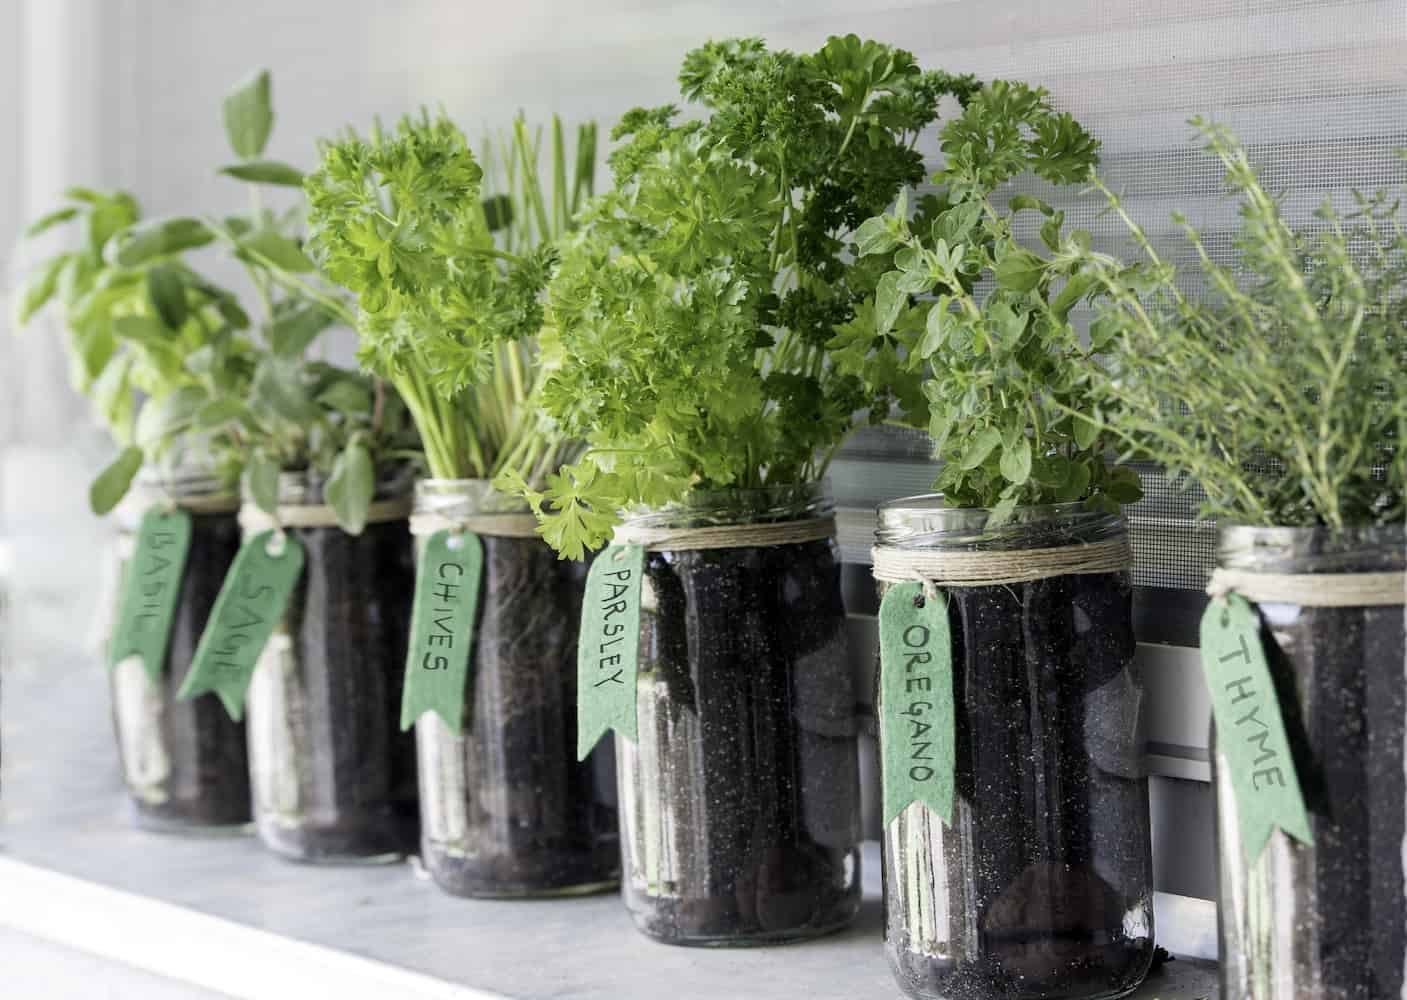 The 10 Best Cooking Herbs to Grow in Your Apartment | ApartmentGuide.com